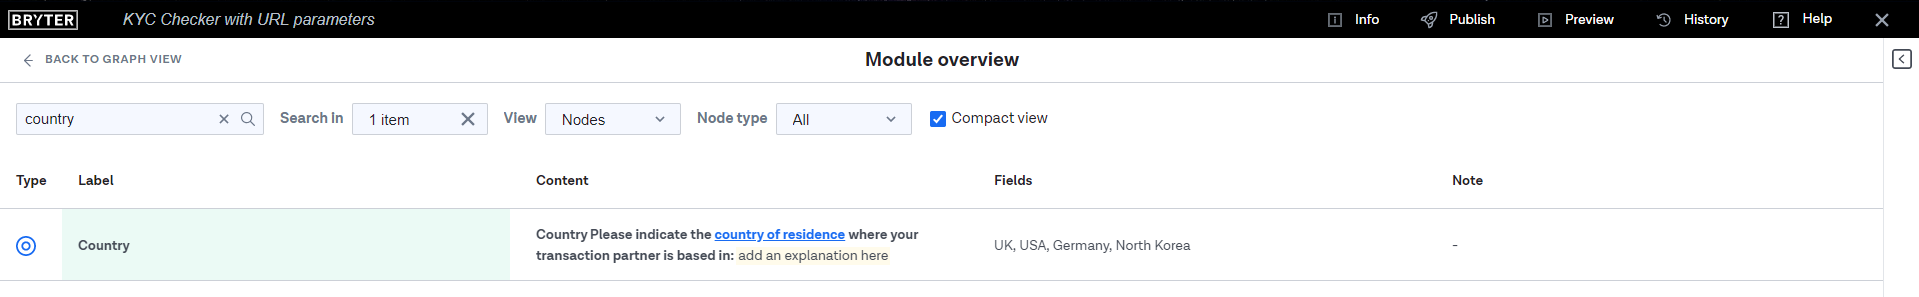 Module_Overview_Search_In.PNG